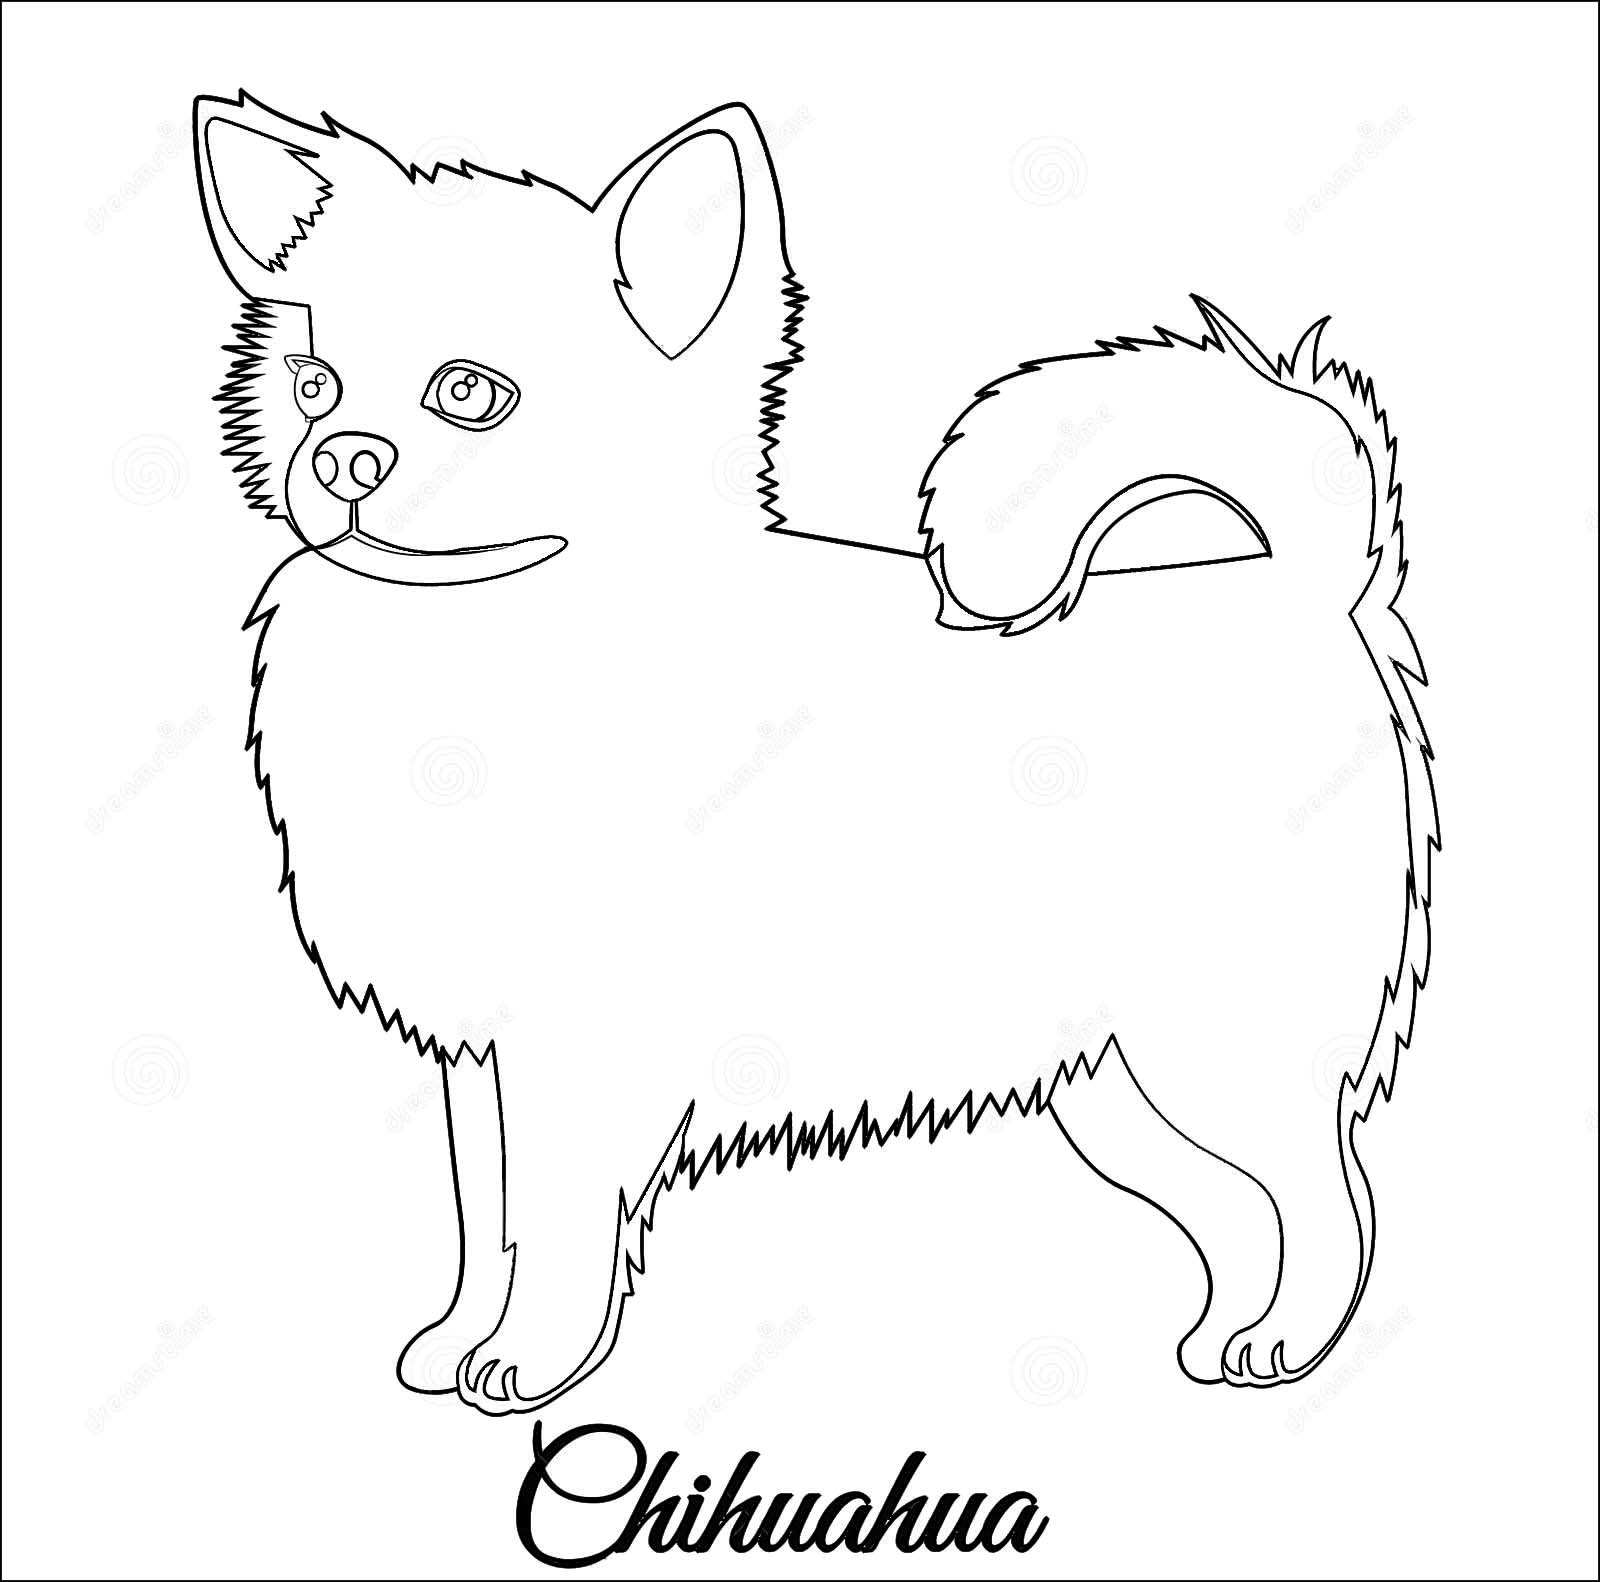 Chihuahua Dog Outline Coloring Page